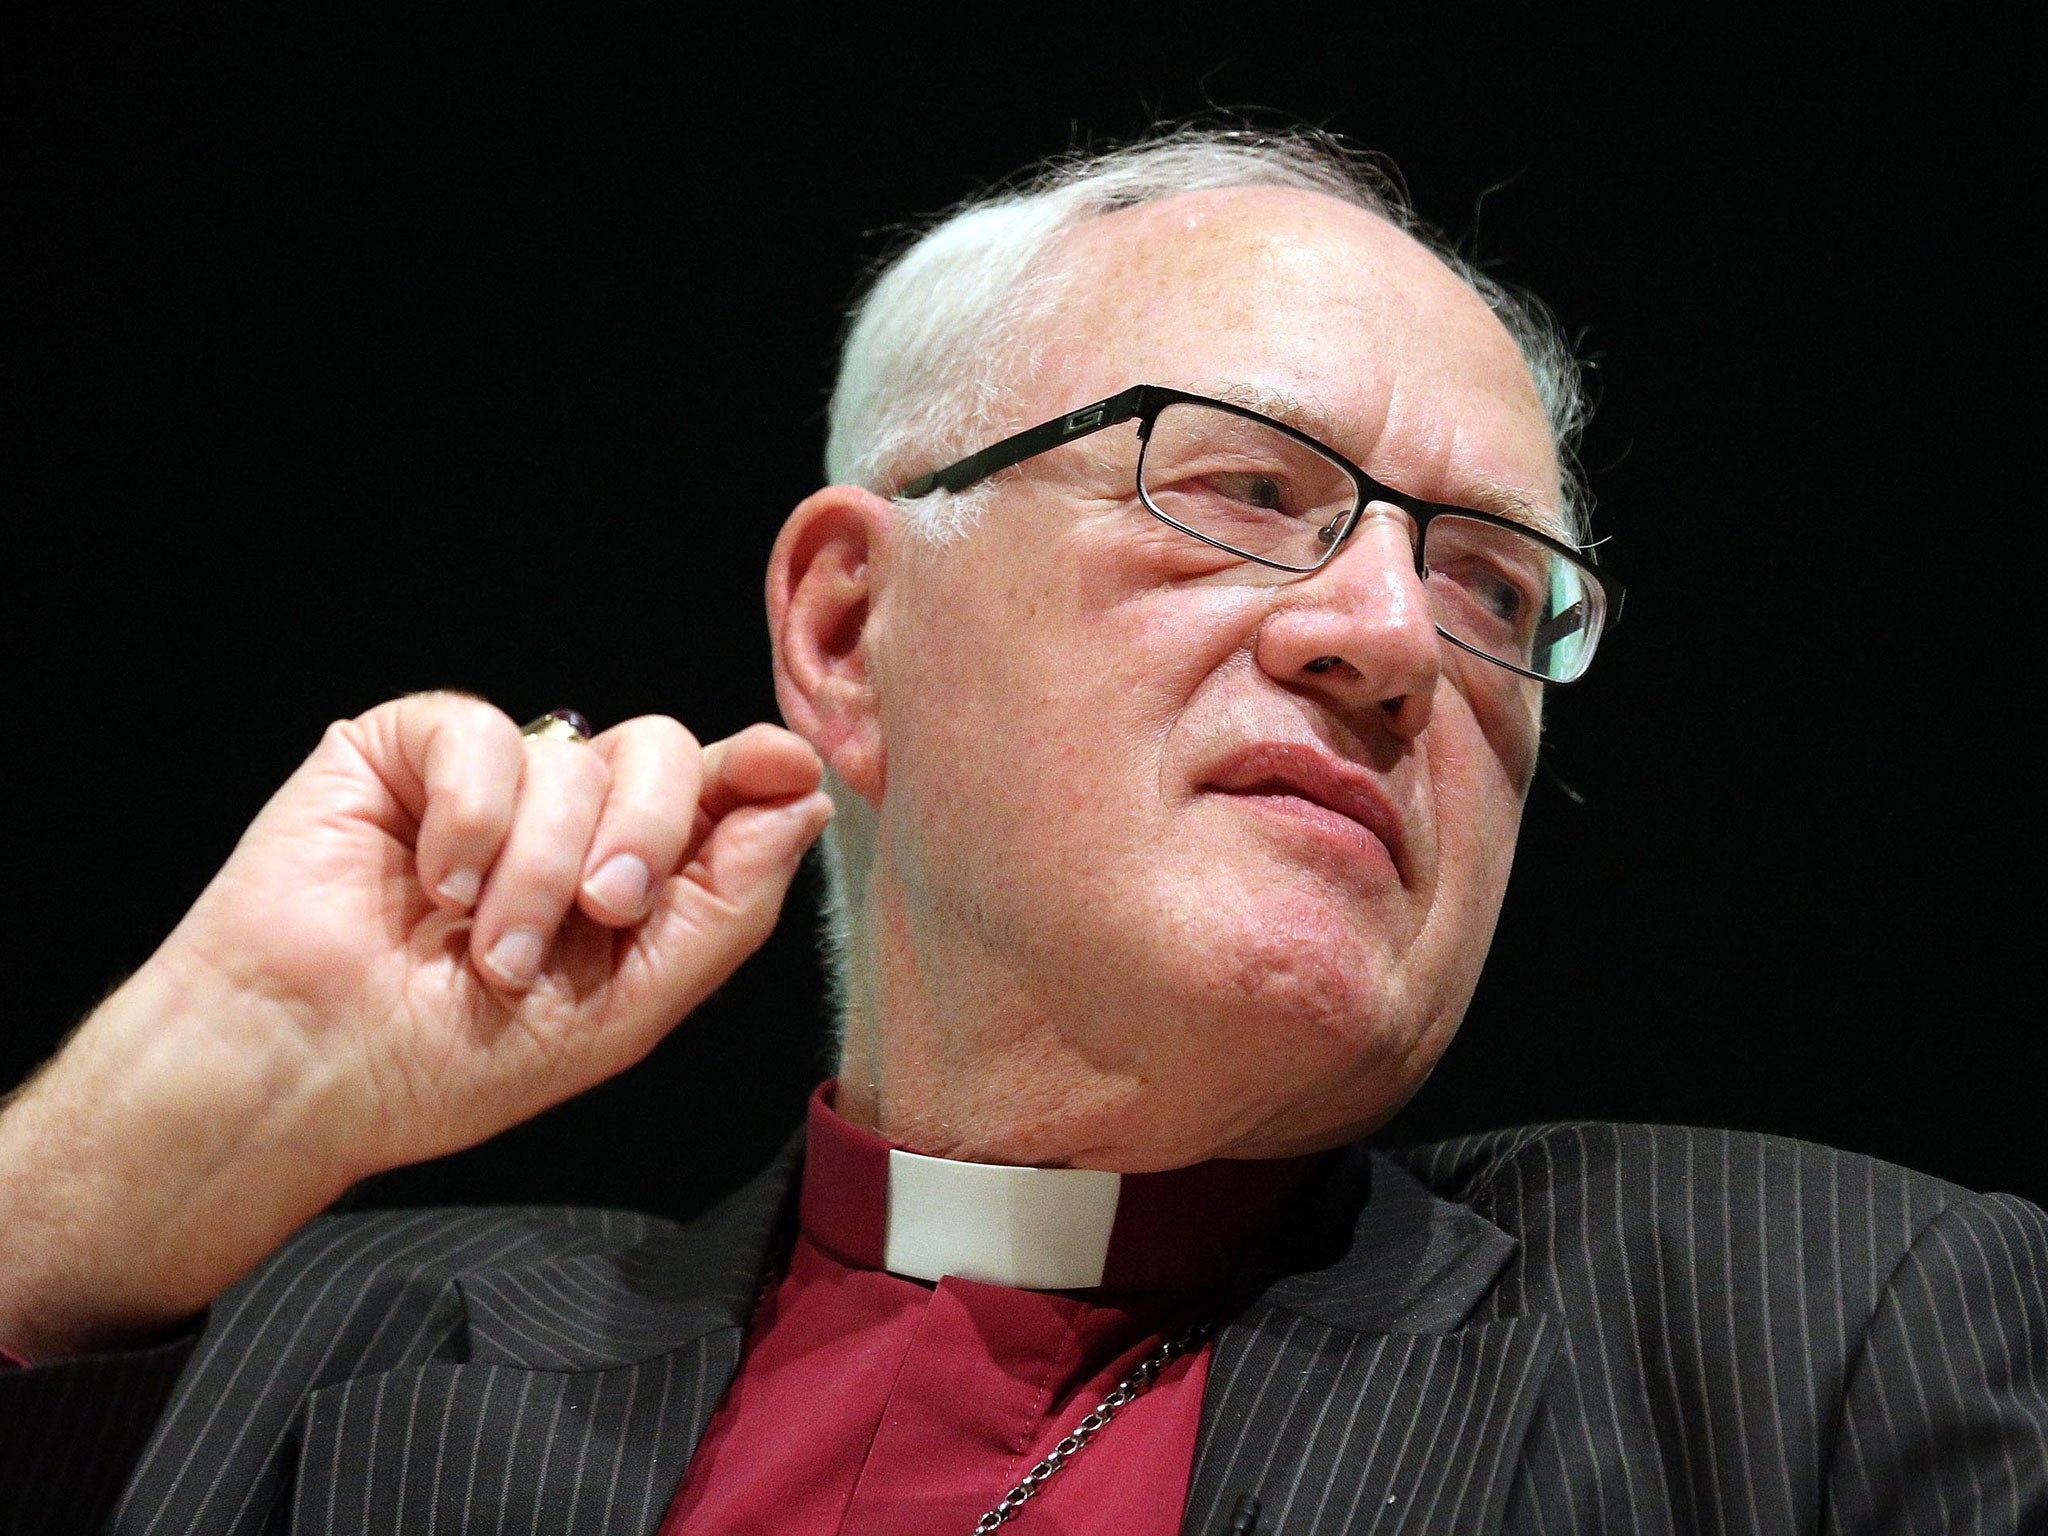 Lord Carey’s views run counter to the long-established position of the Church of England